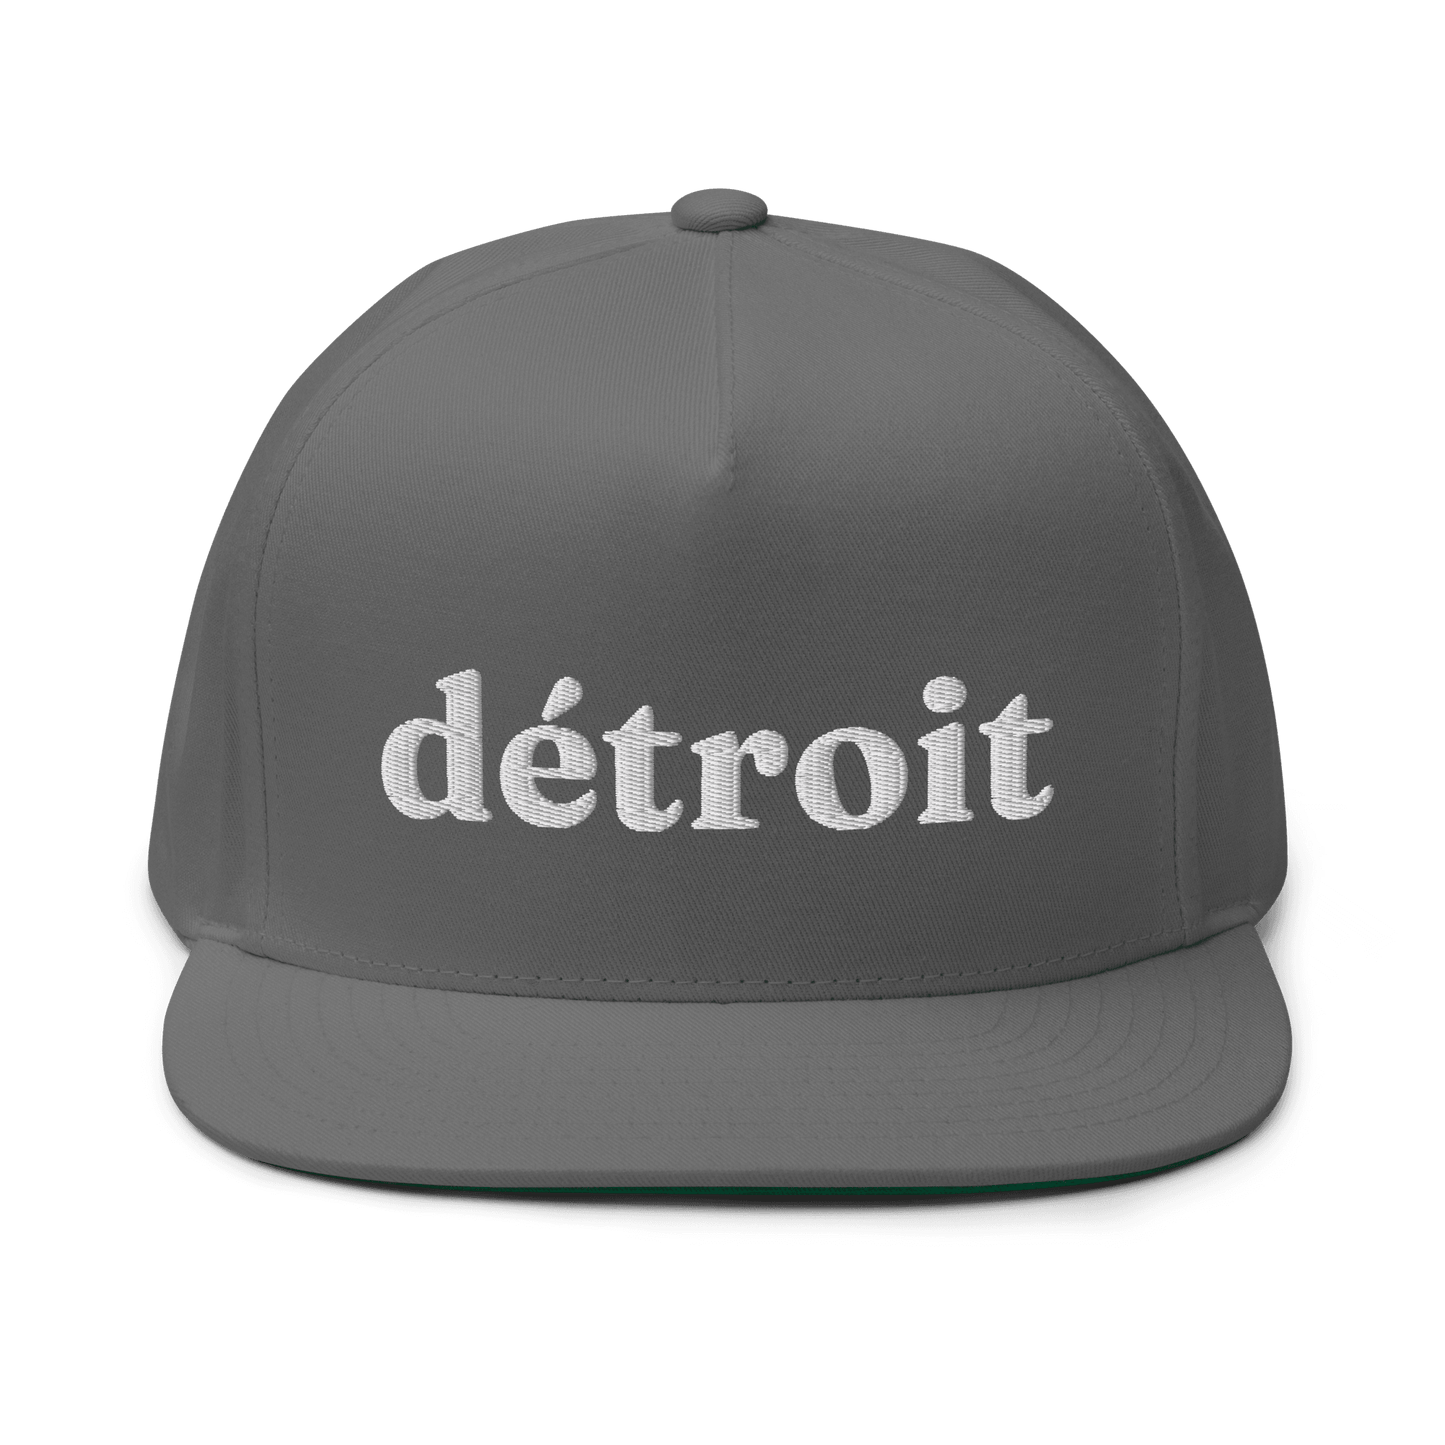 'Detroit' Flat Bill Cap (Old-Style Serif Font) | White/Navy Embroidery - Circumspice Michigan